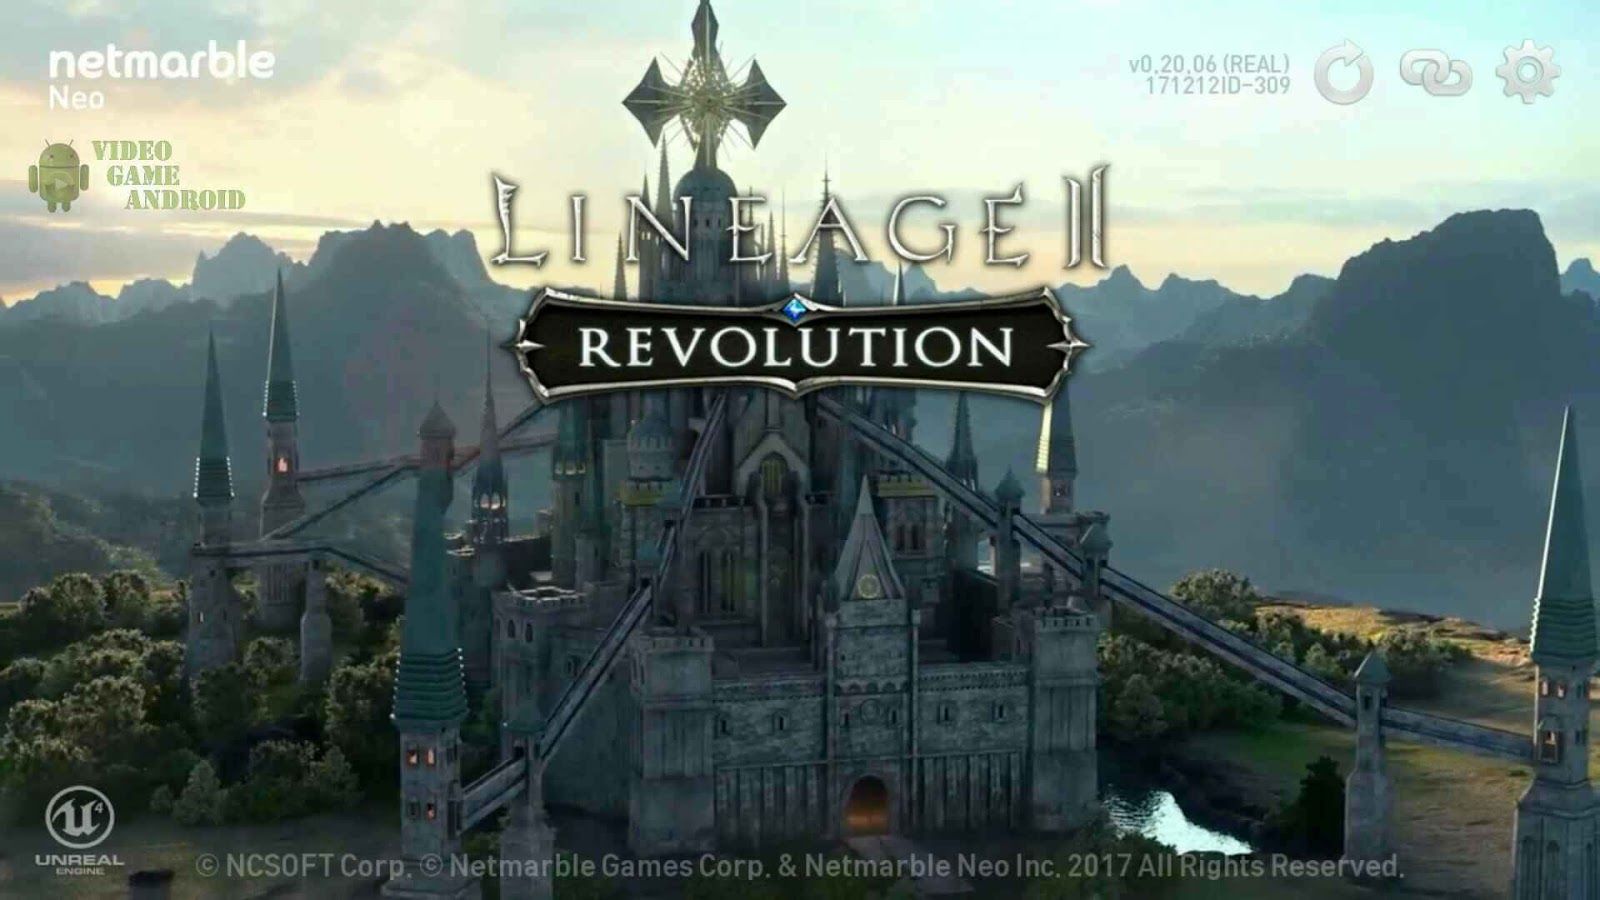 Lineage 2 Revolution. Netmarble games. Lineage 2 Unreal engine 4. Lineage 2 Revolution Gameplay.